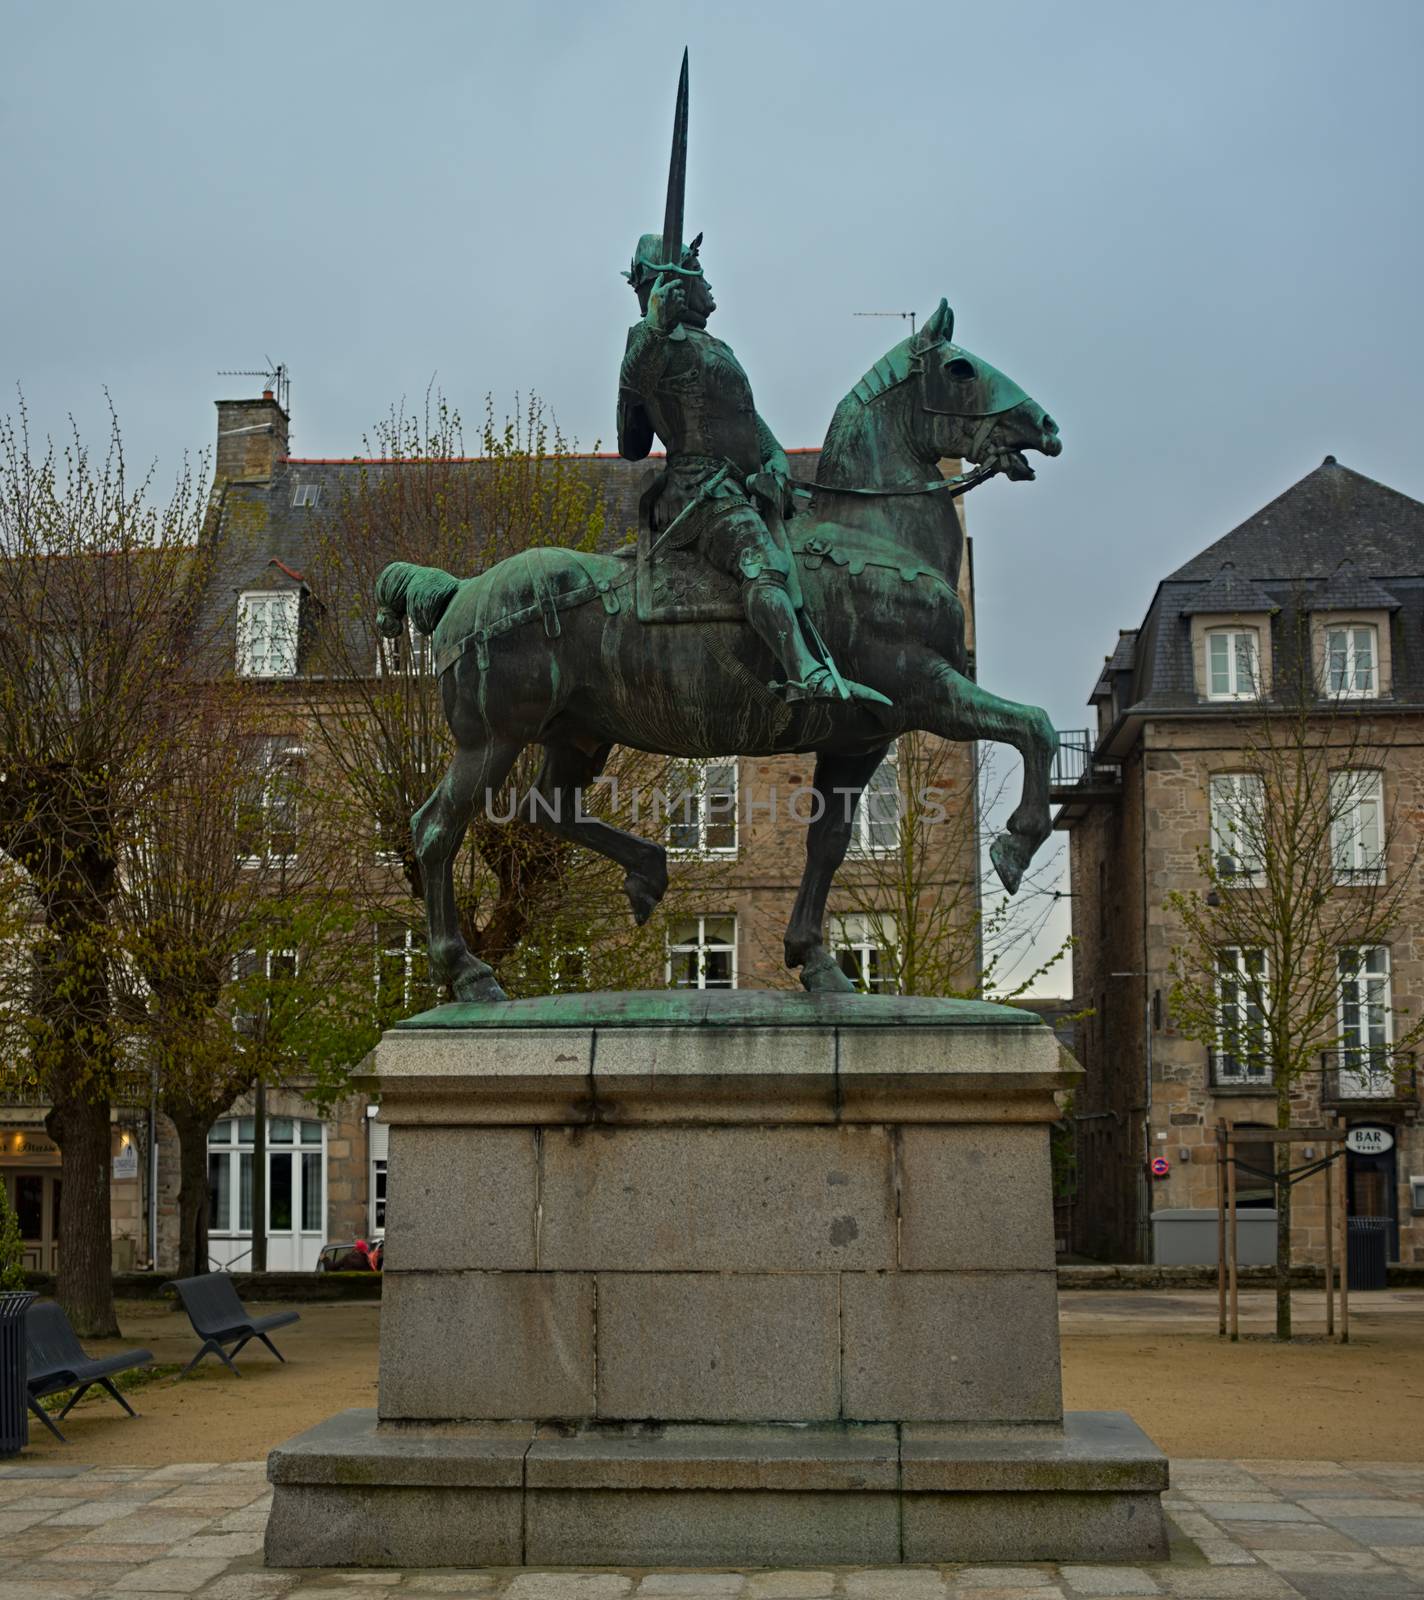 Monument dedicated to Bertrand Du Guesclin in Dinan, France by sheriffkule